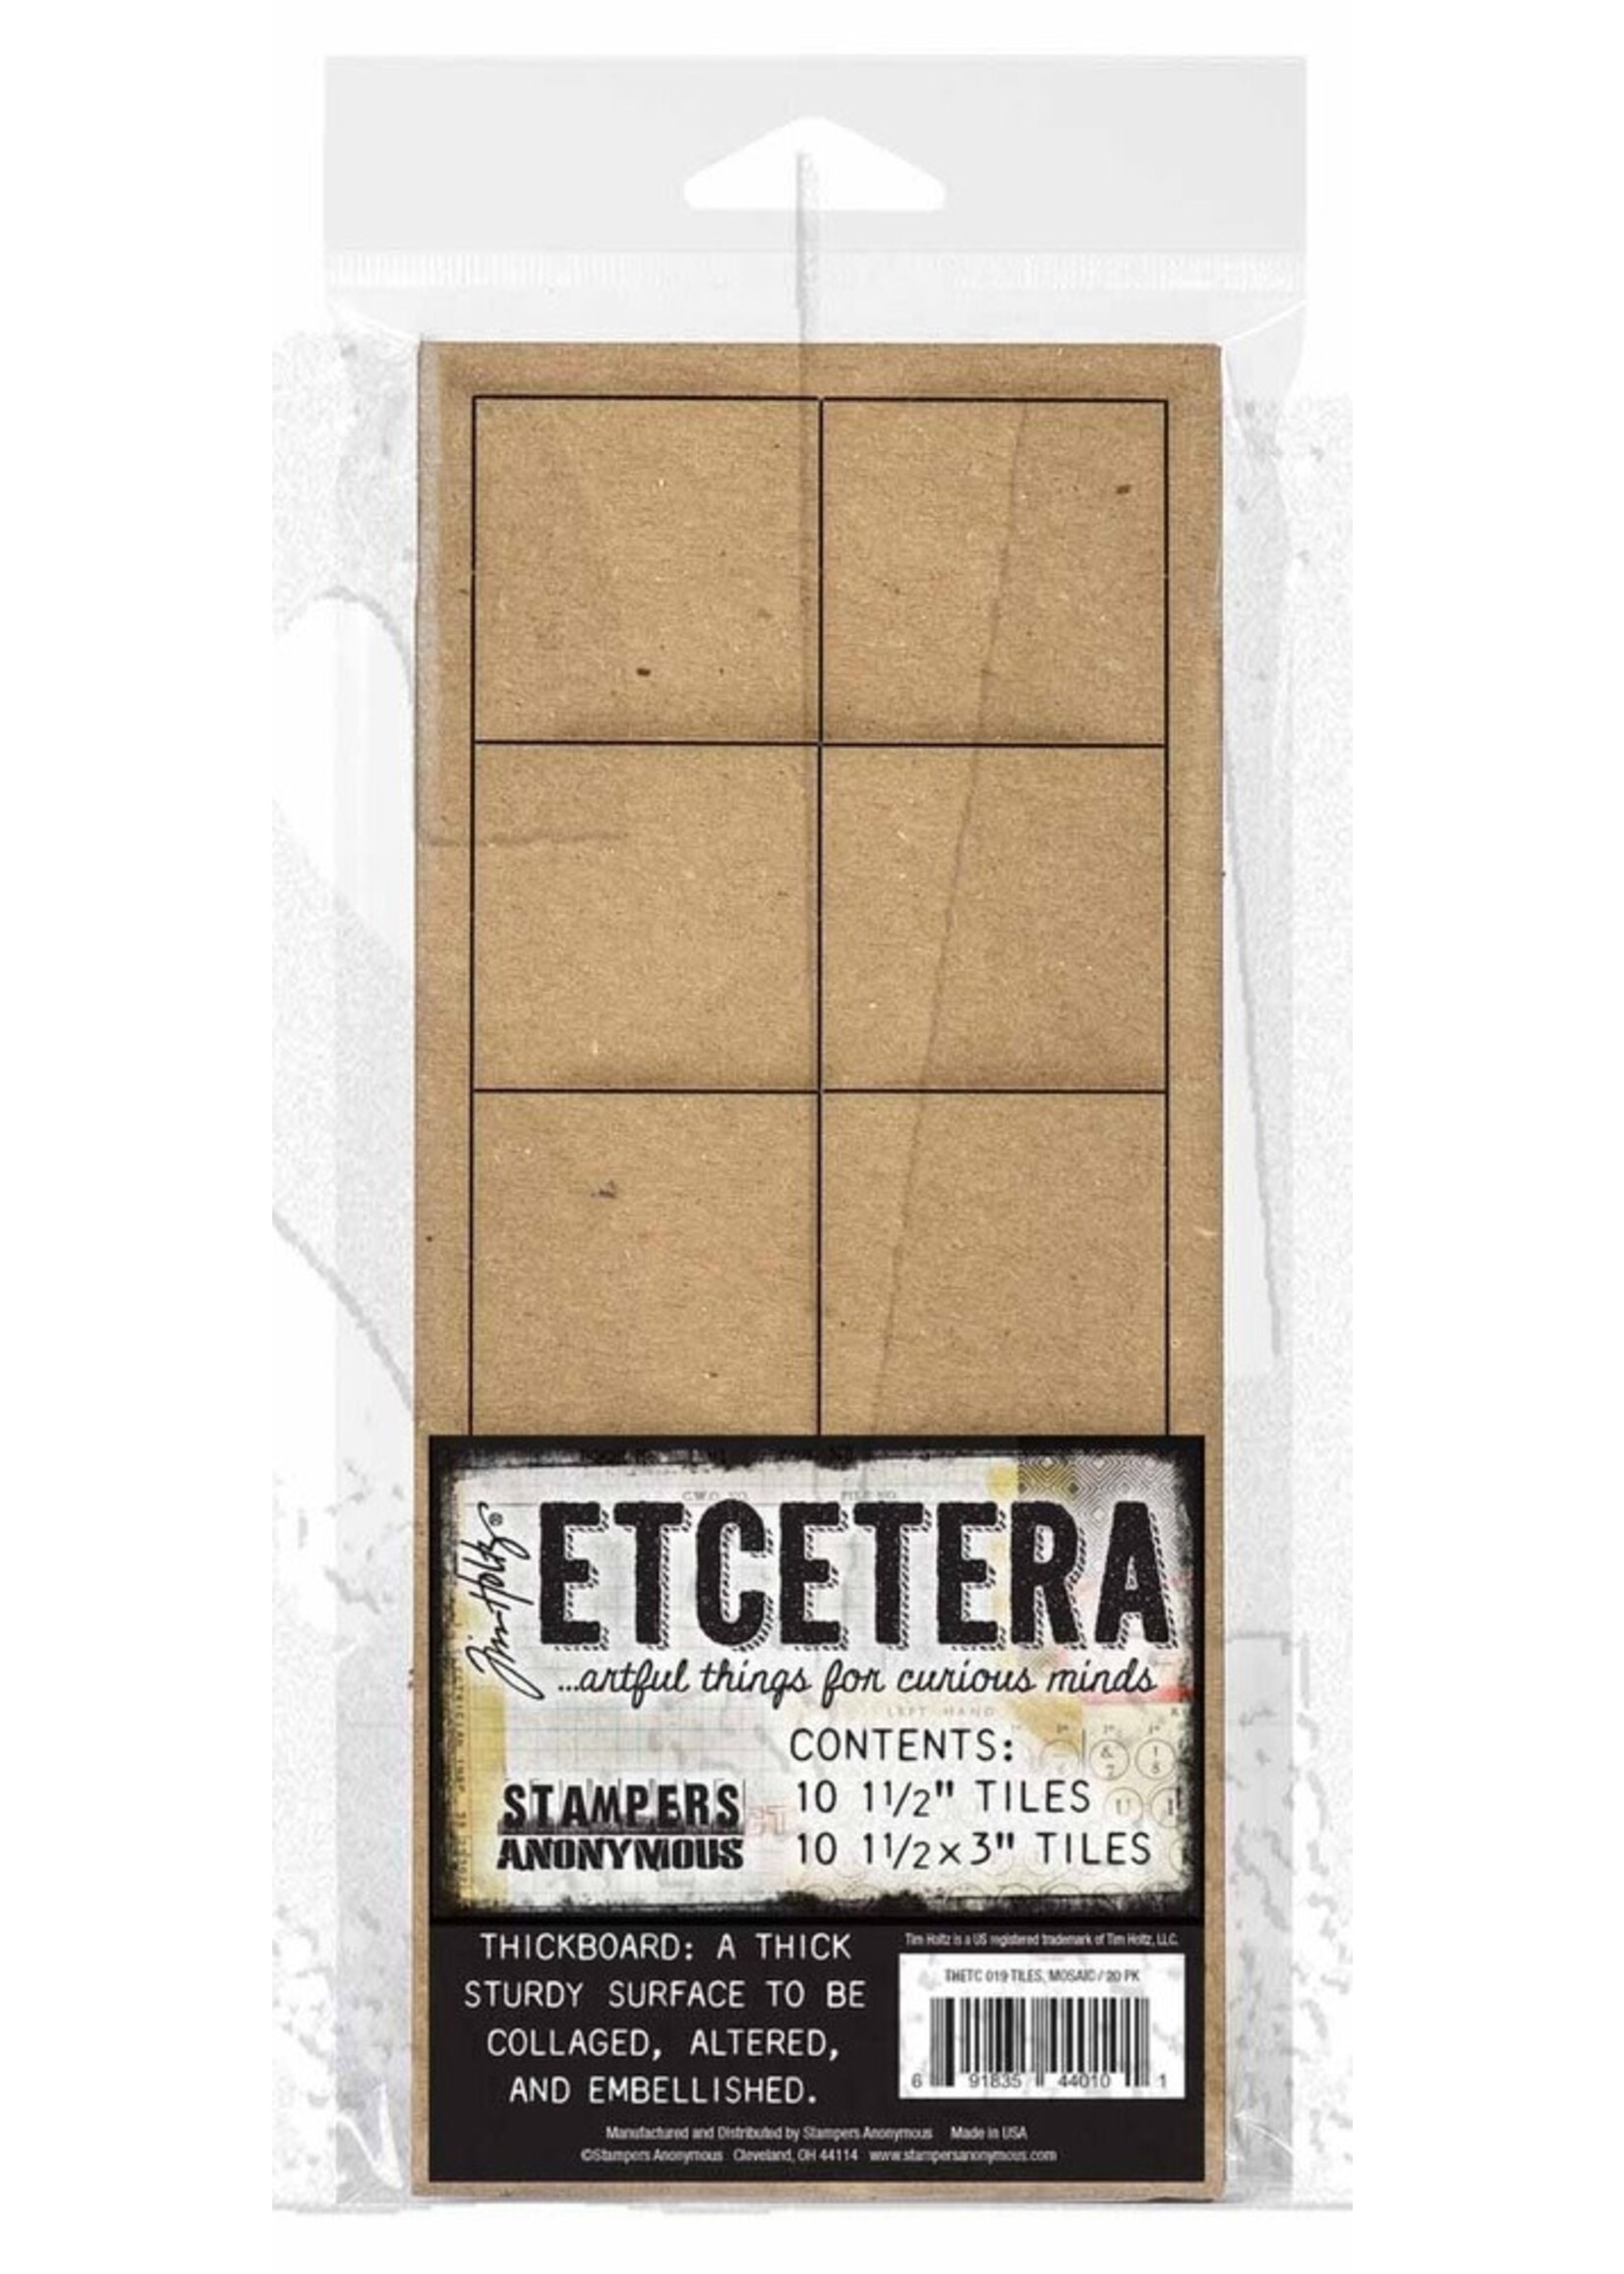 Stampers Anonymous Tim Holtz Etcetera, Tiles - Mosaic